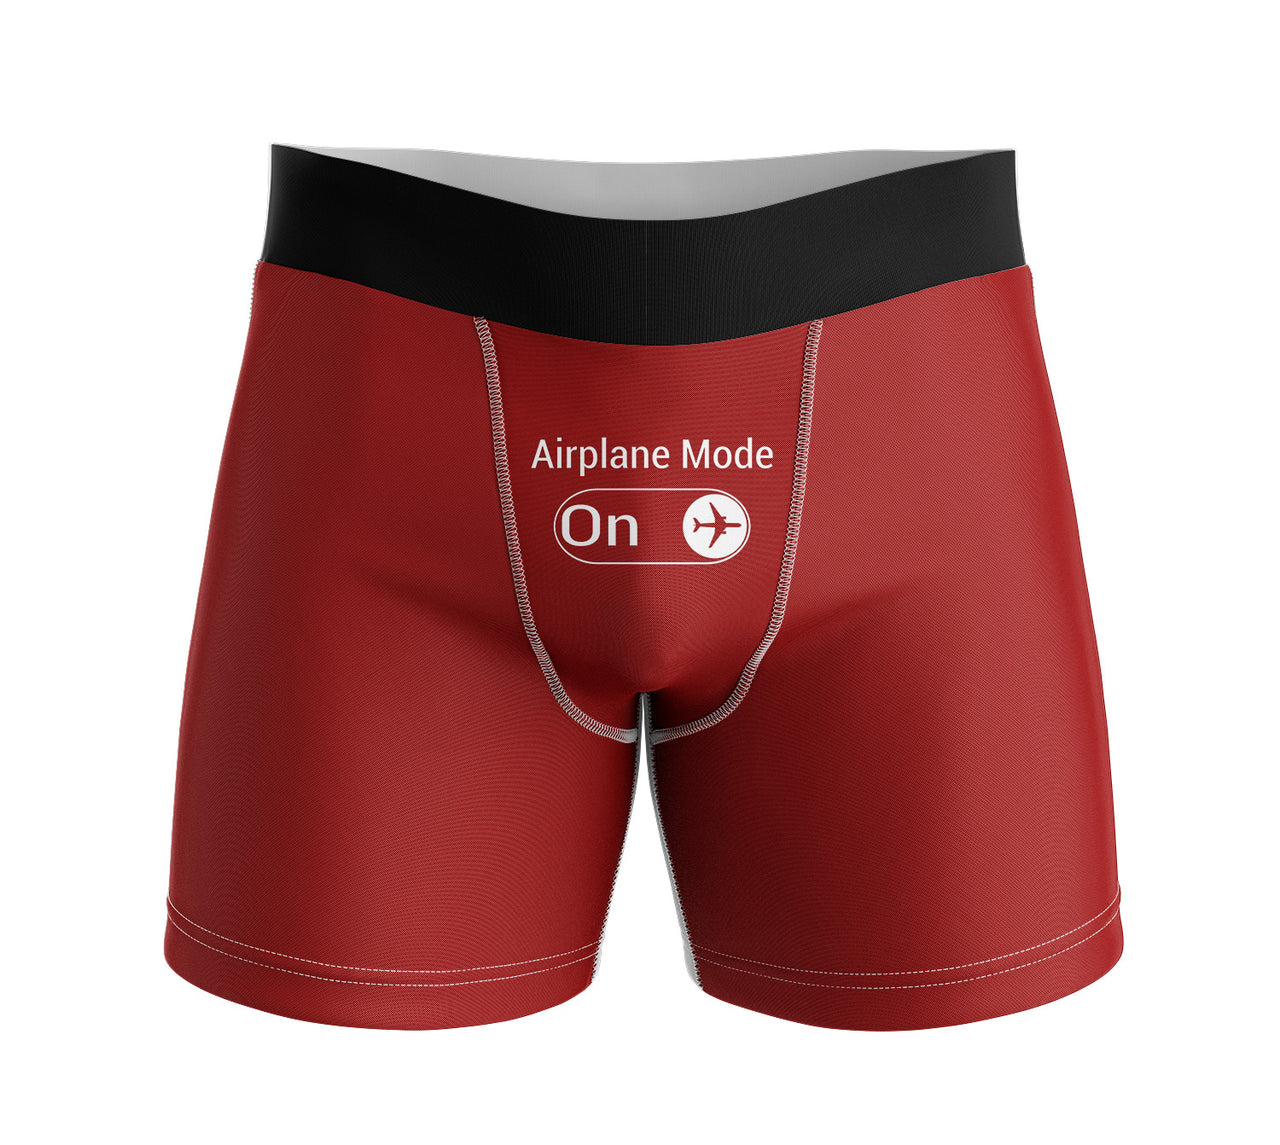 Airplane Mode On Designed Men Boxers